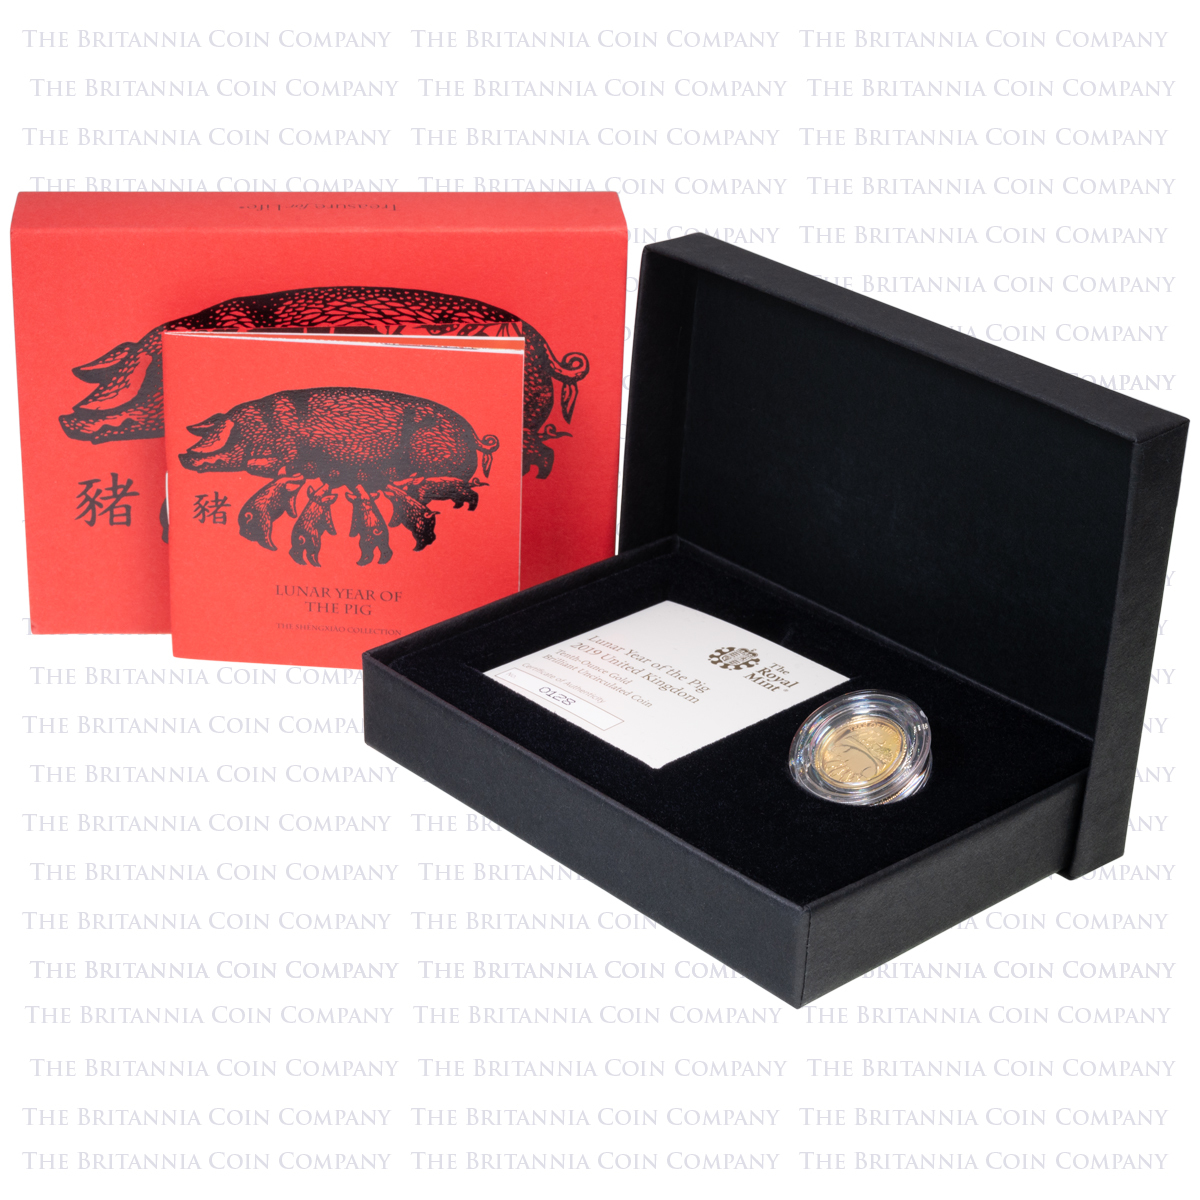 UKP19GT 2019 Lunar Year Of The Pig Tenth Ounce Gold Brilliant Uncirculated Coin Boxed